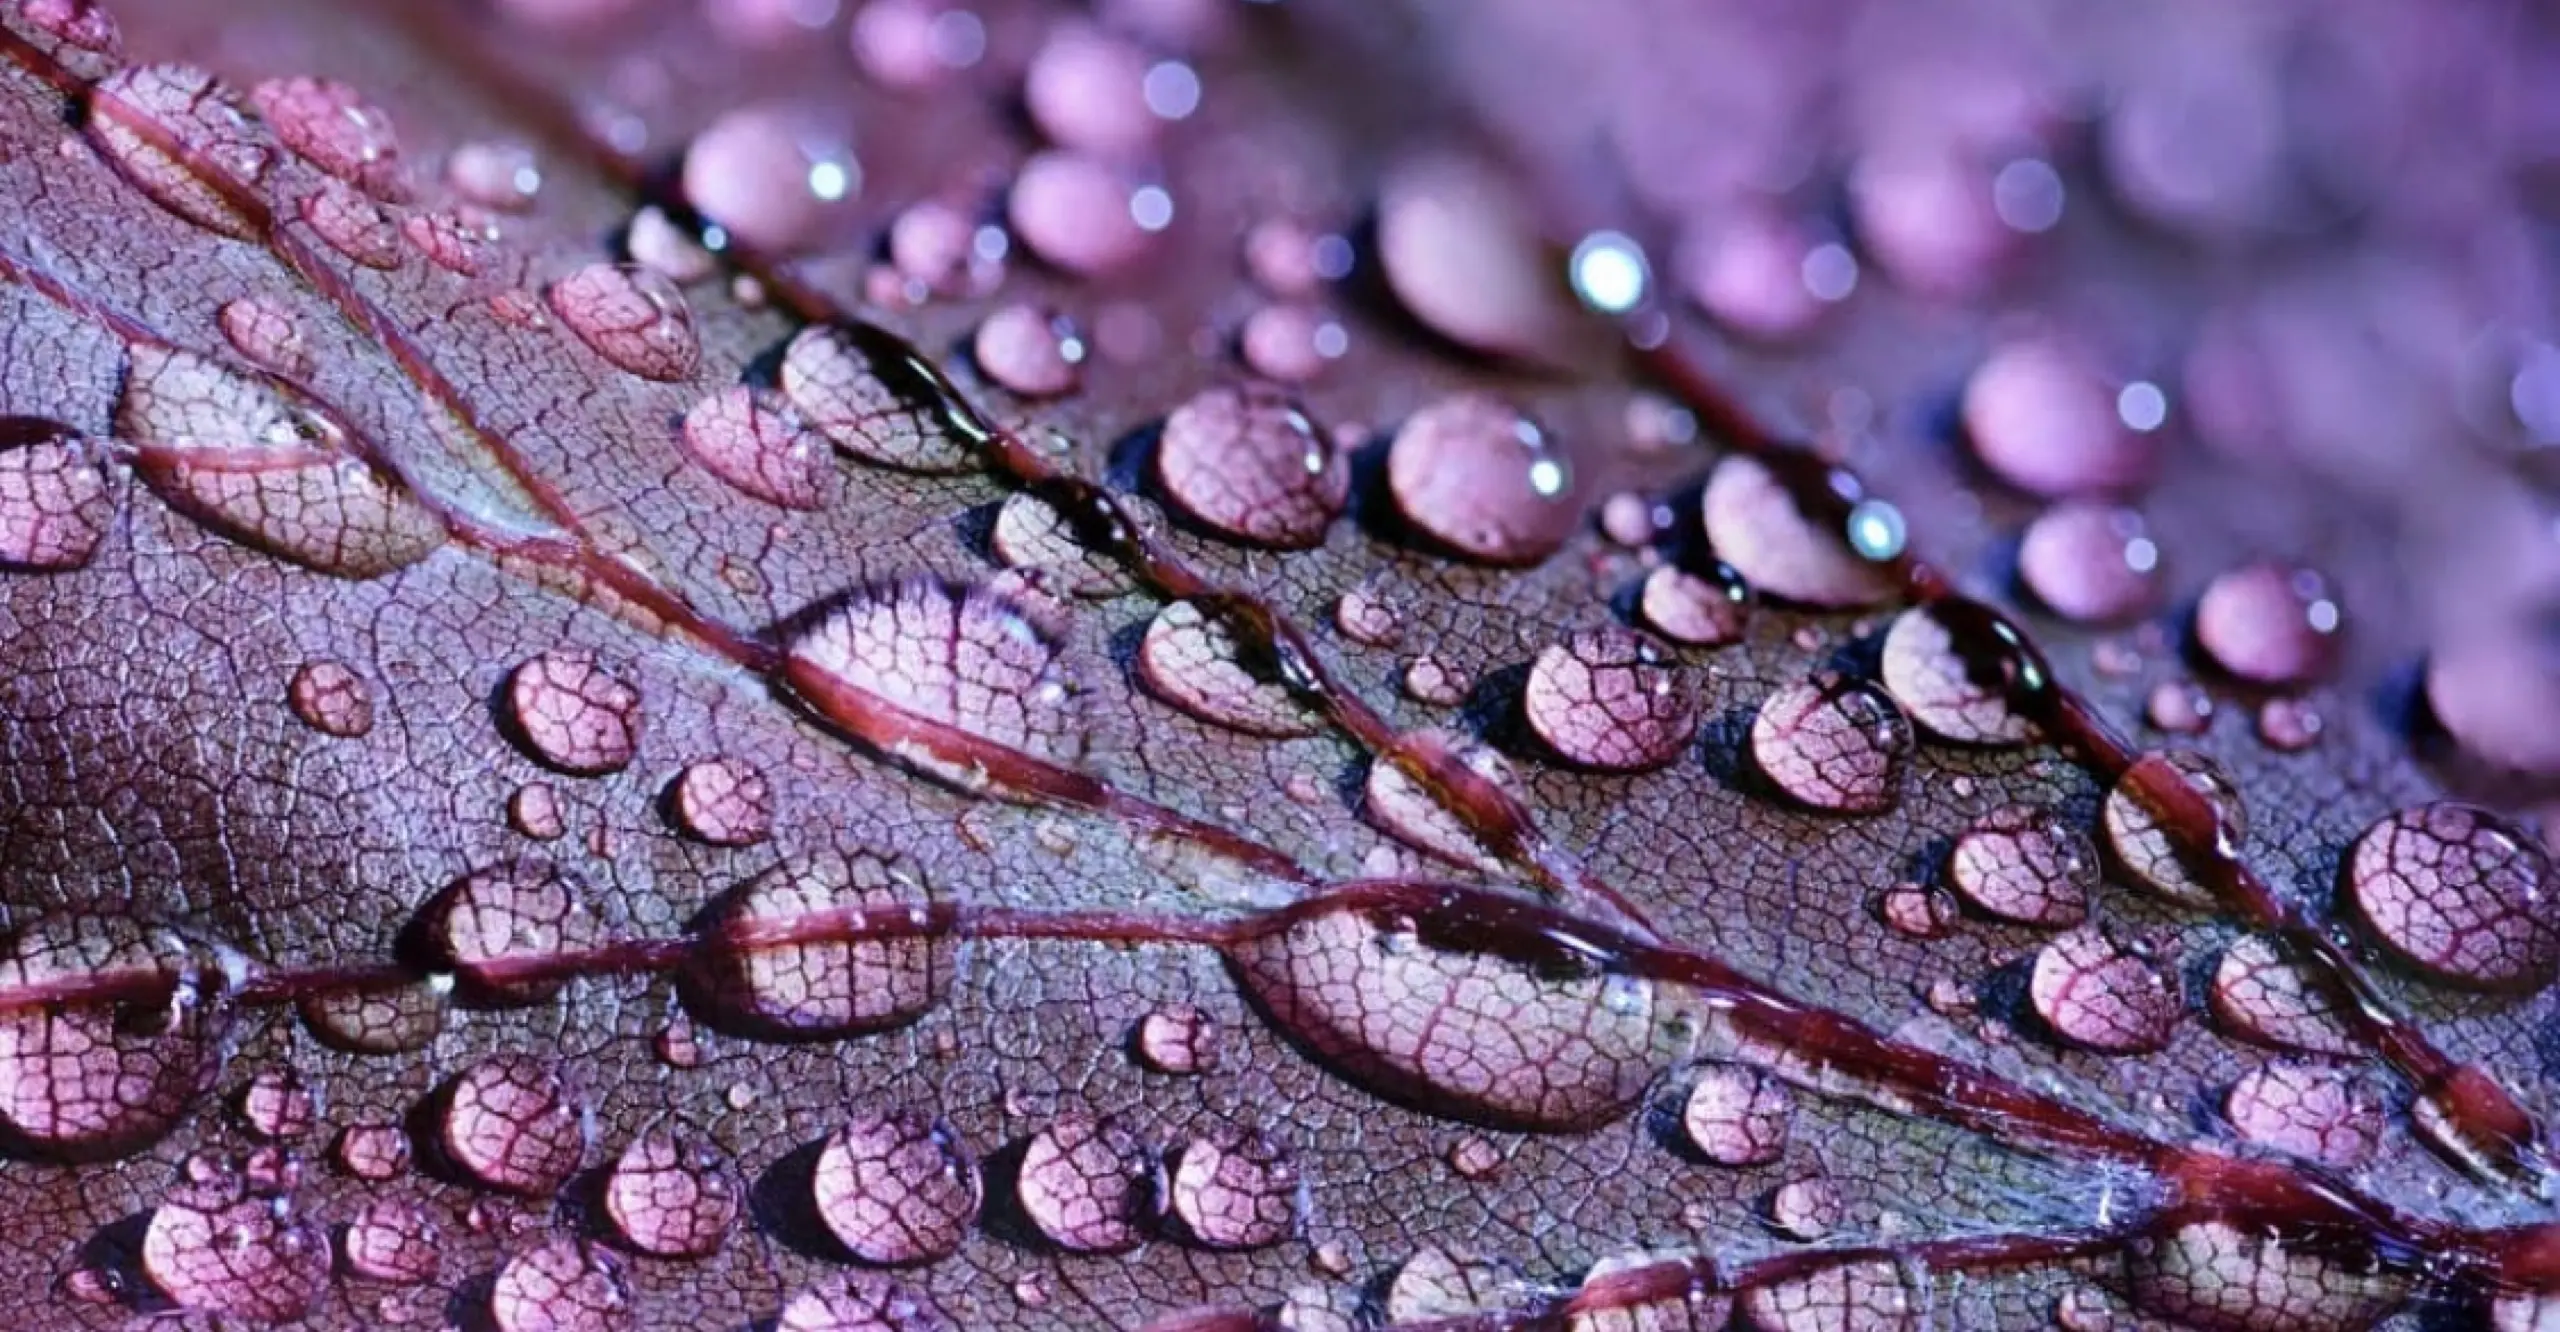 Close up image of water droplets on a purple leaf